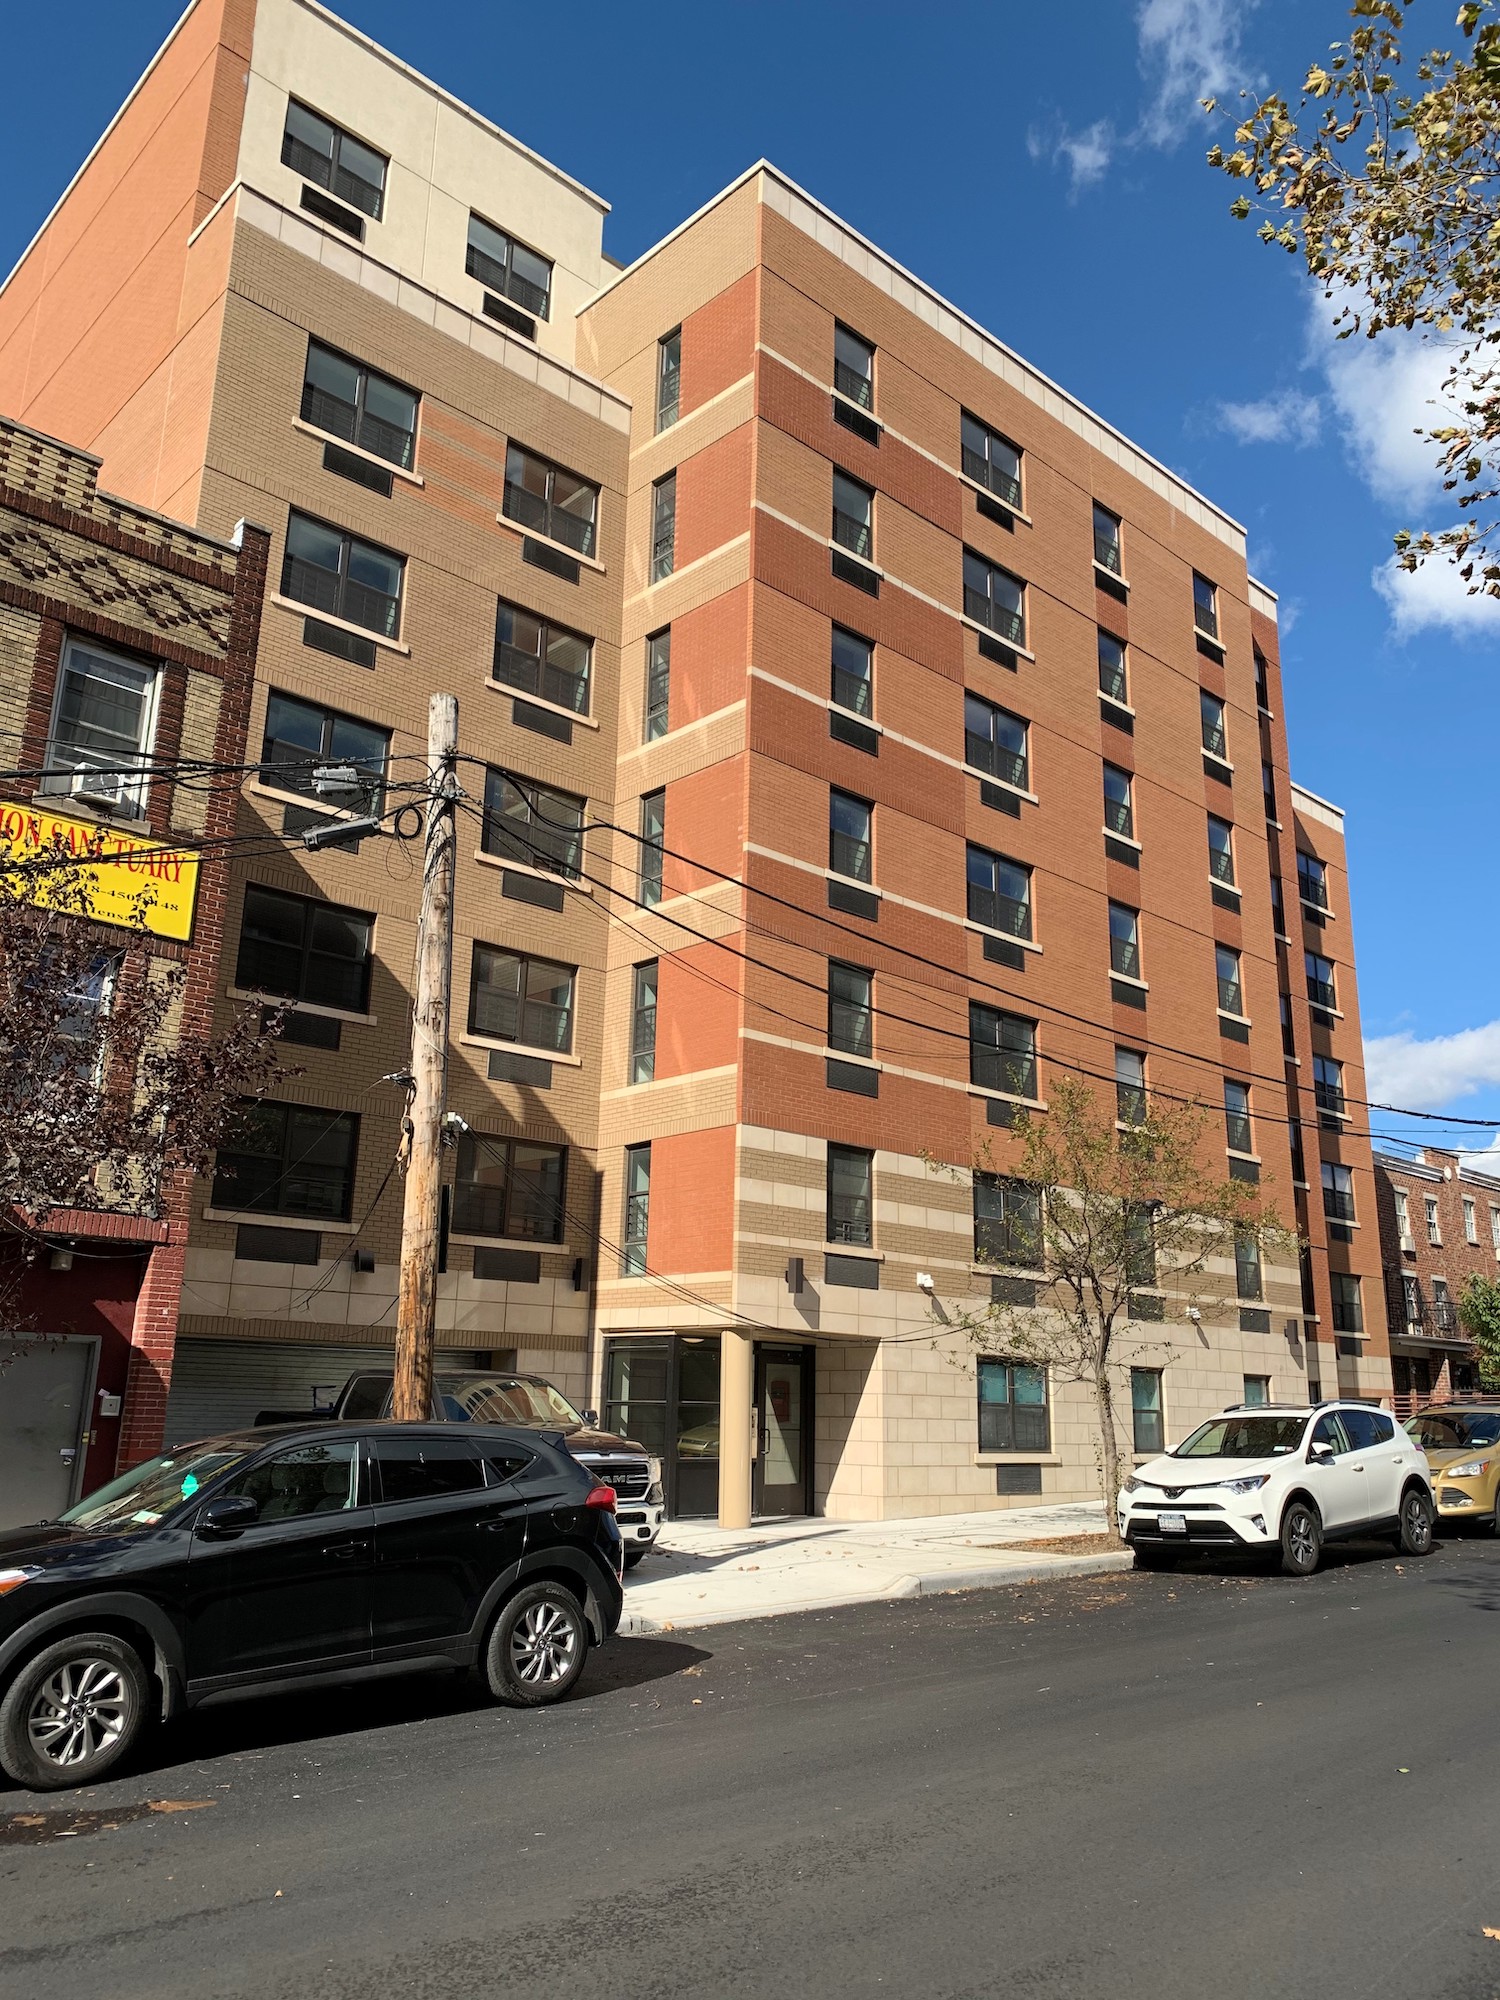 Washington Manor Apartments at 1969 Washington Avenue in East Tremont, The Bronx. Courtesy of NYC Housing Connect